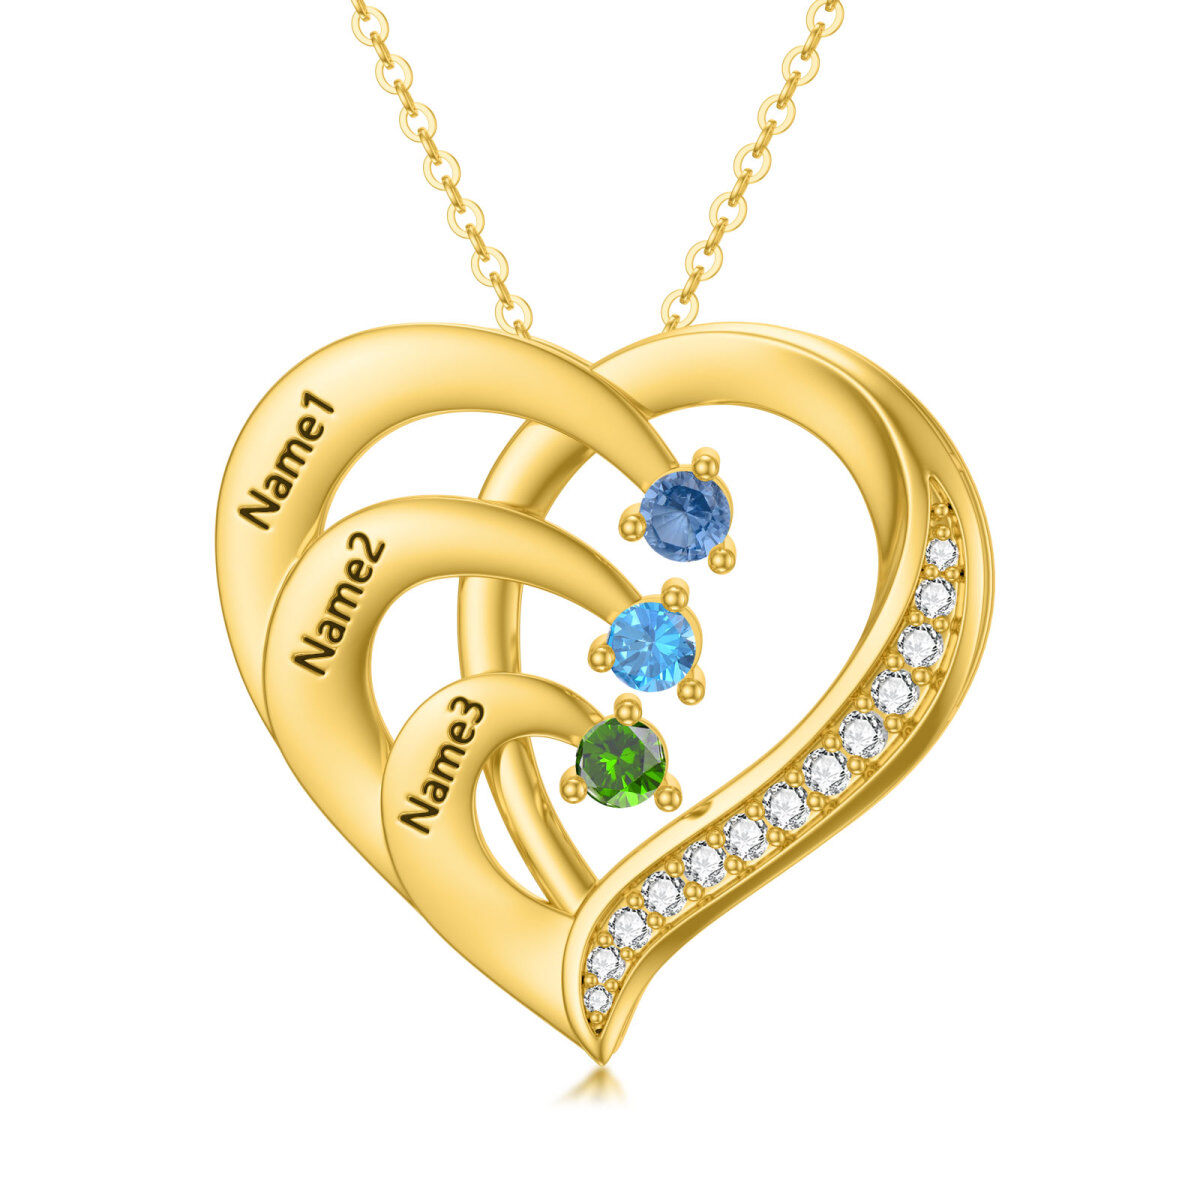 14K Gold Circular Shaped Crystal & Cubic Zirconia Heart Pendant Necklace-1